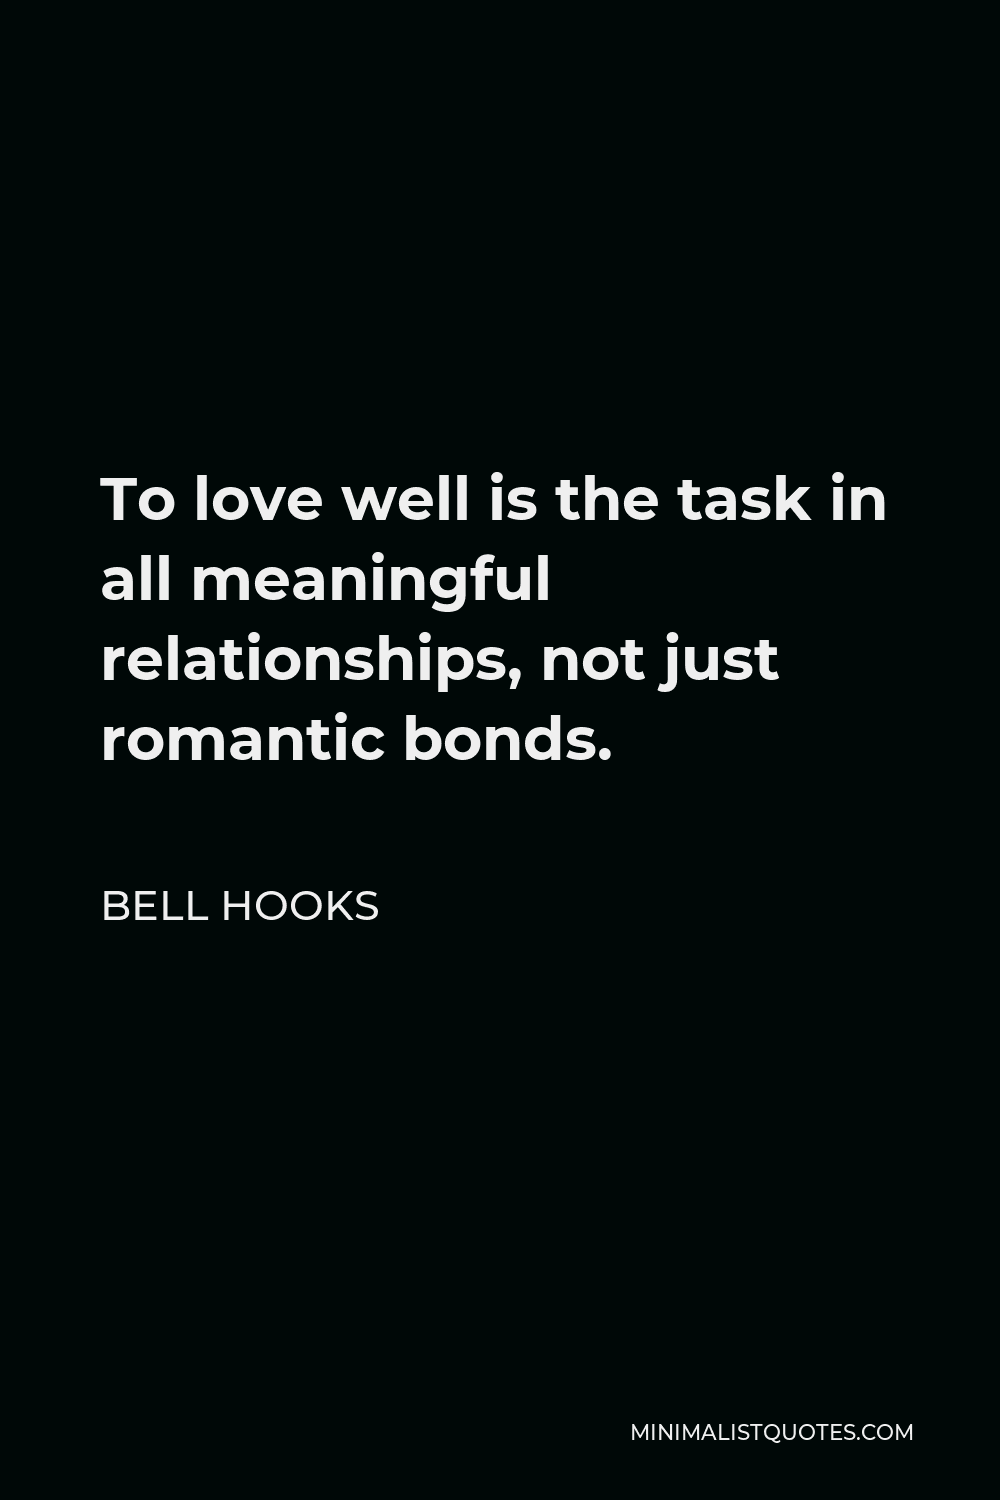 Bell Hooks Quote: To love well is the task in all meaningful ...